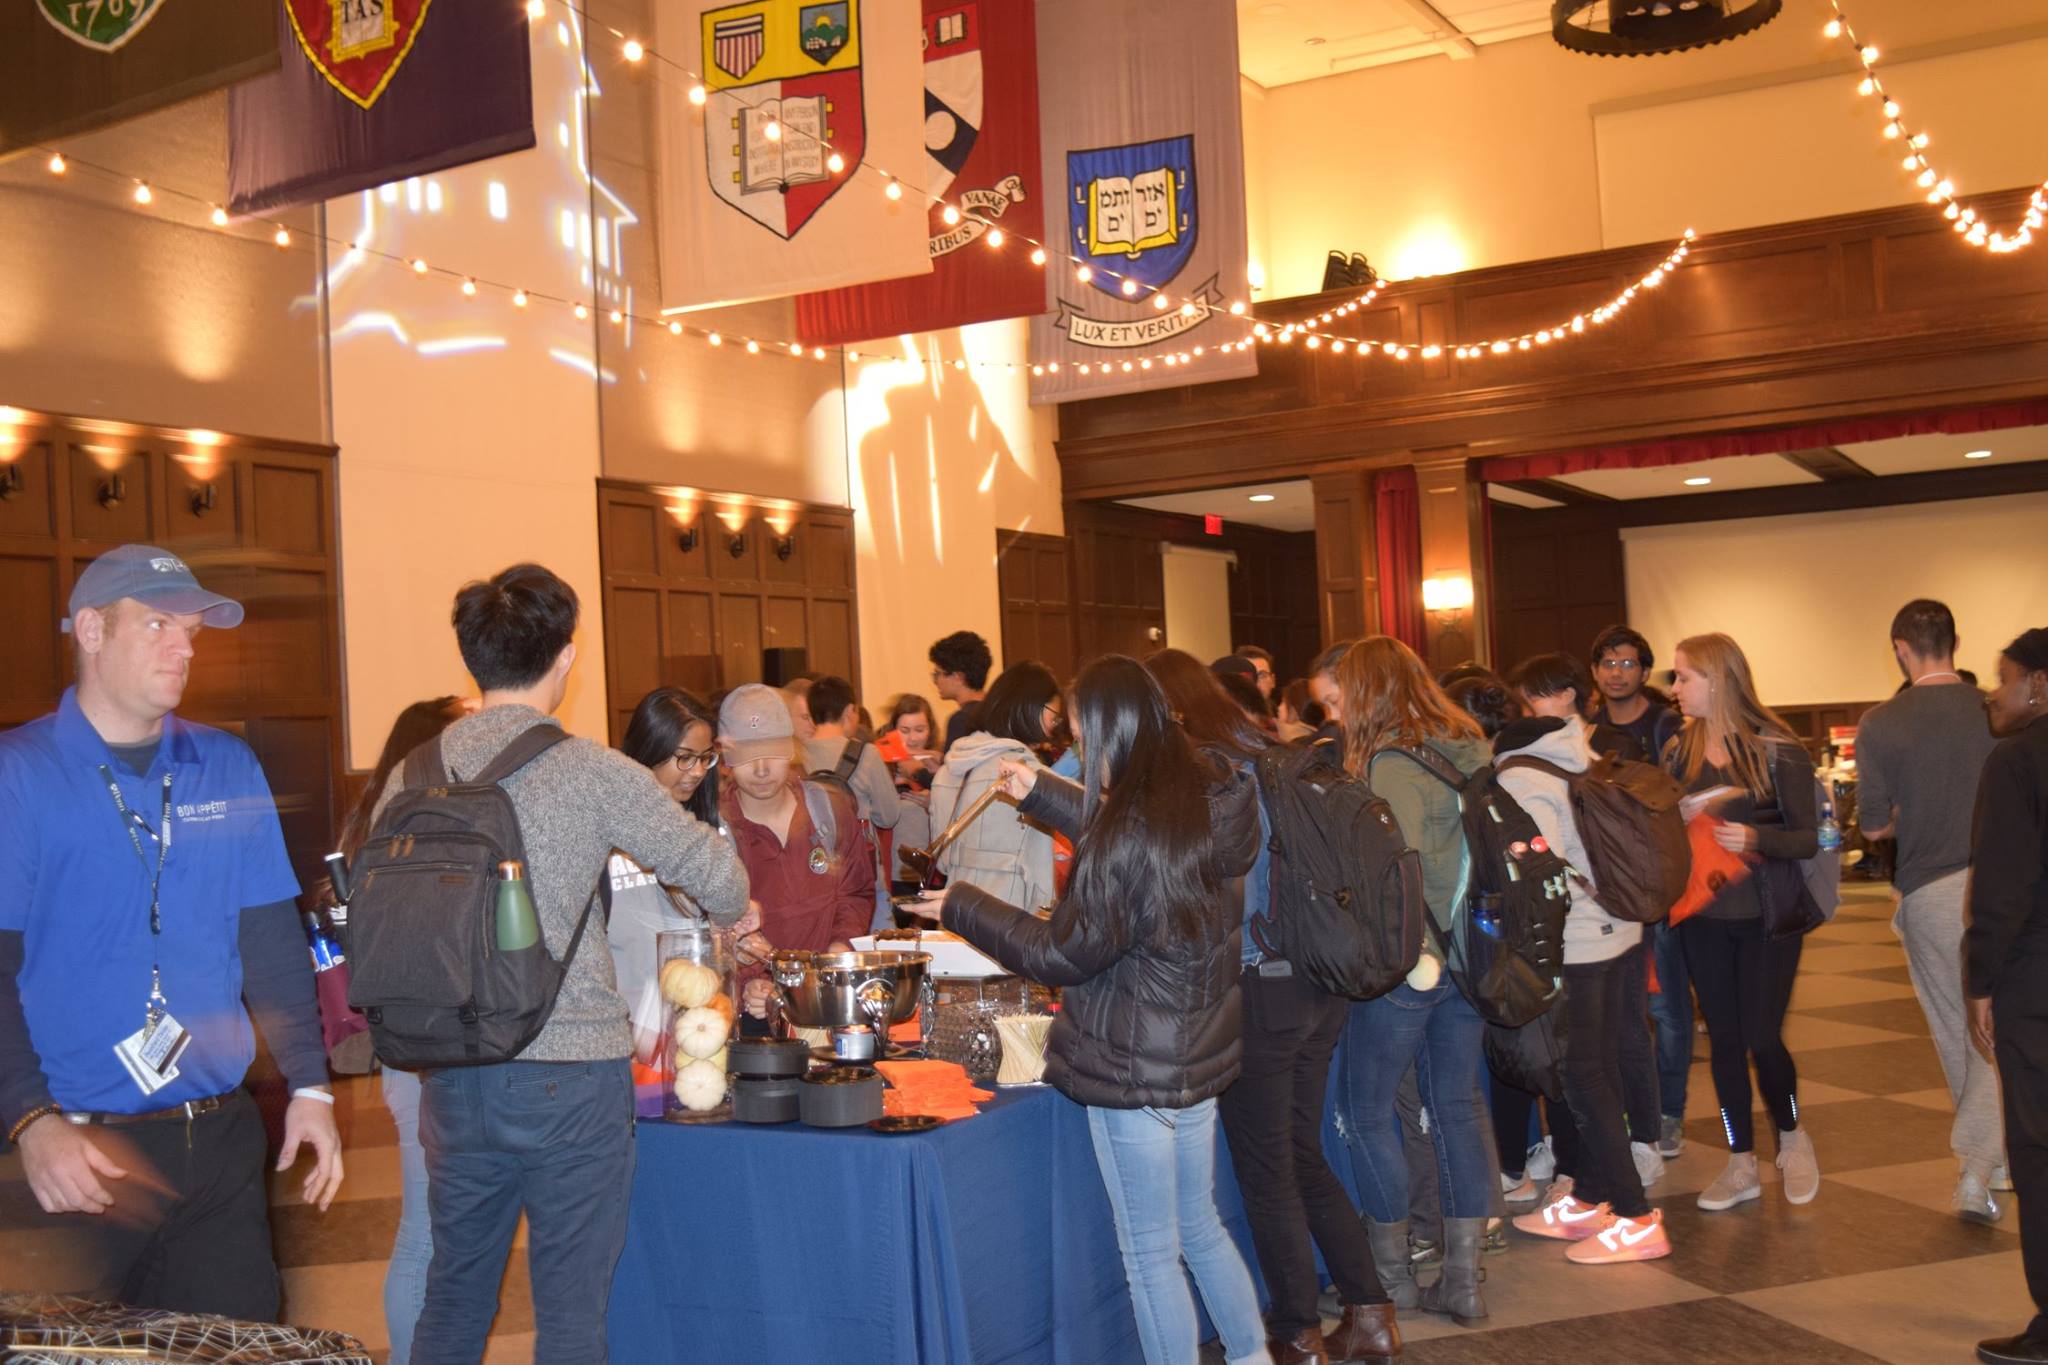 Penn Students gather in the Houston Hall of Flags around a banquet table loaded with Halloween sweets